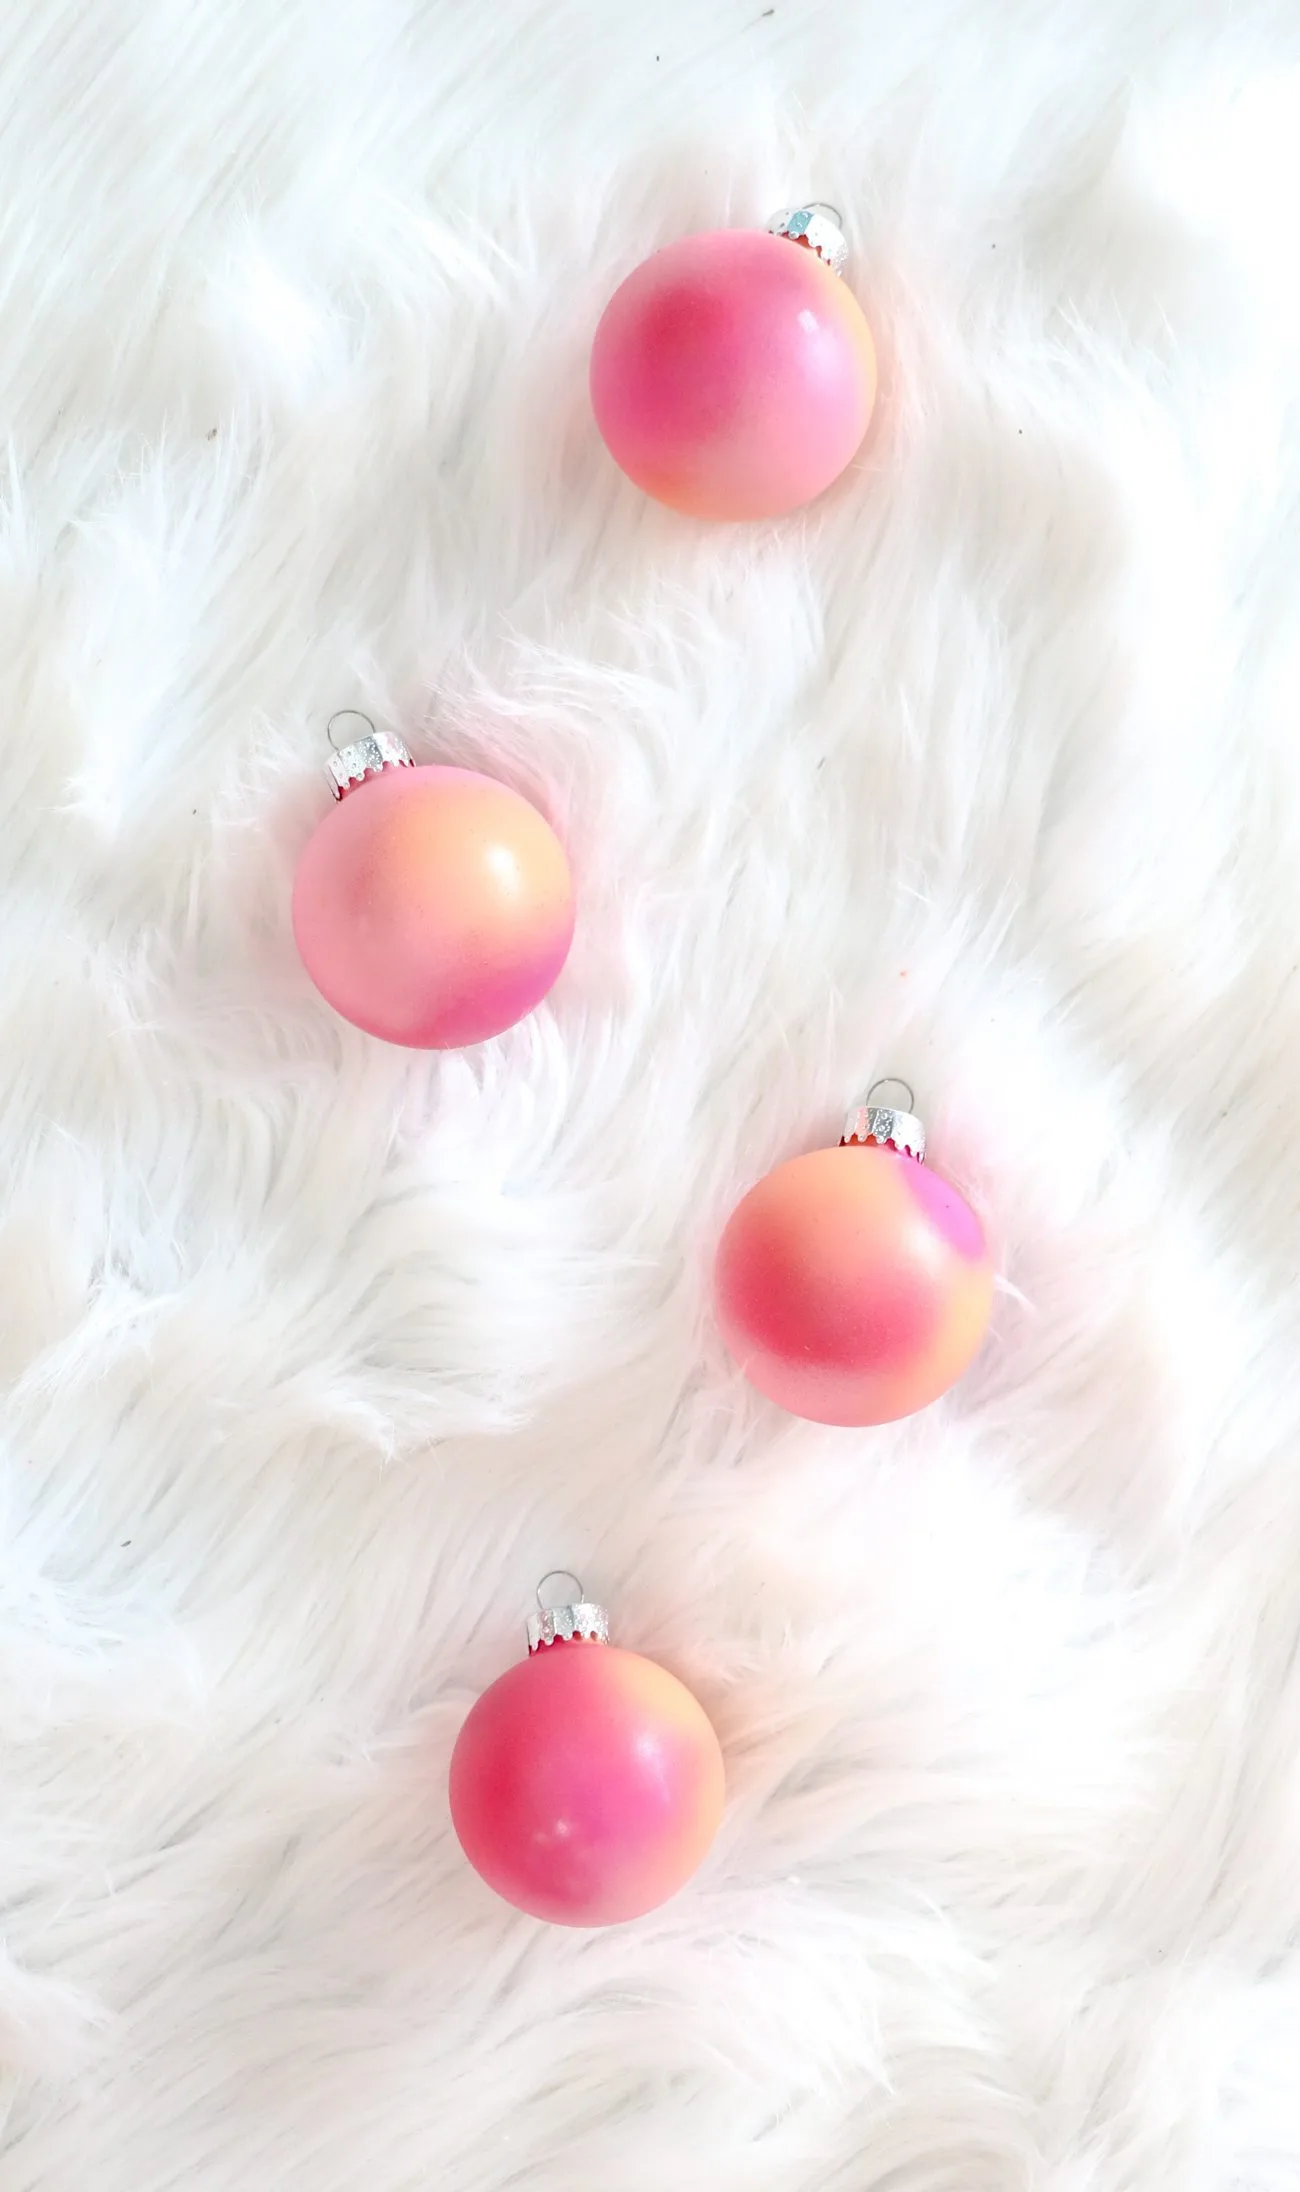 DIY Gradient Painted Ornaments | Easy glass ornament craft ideas from @cydconverse